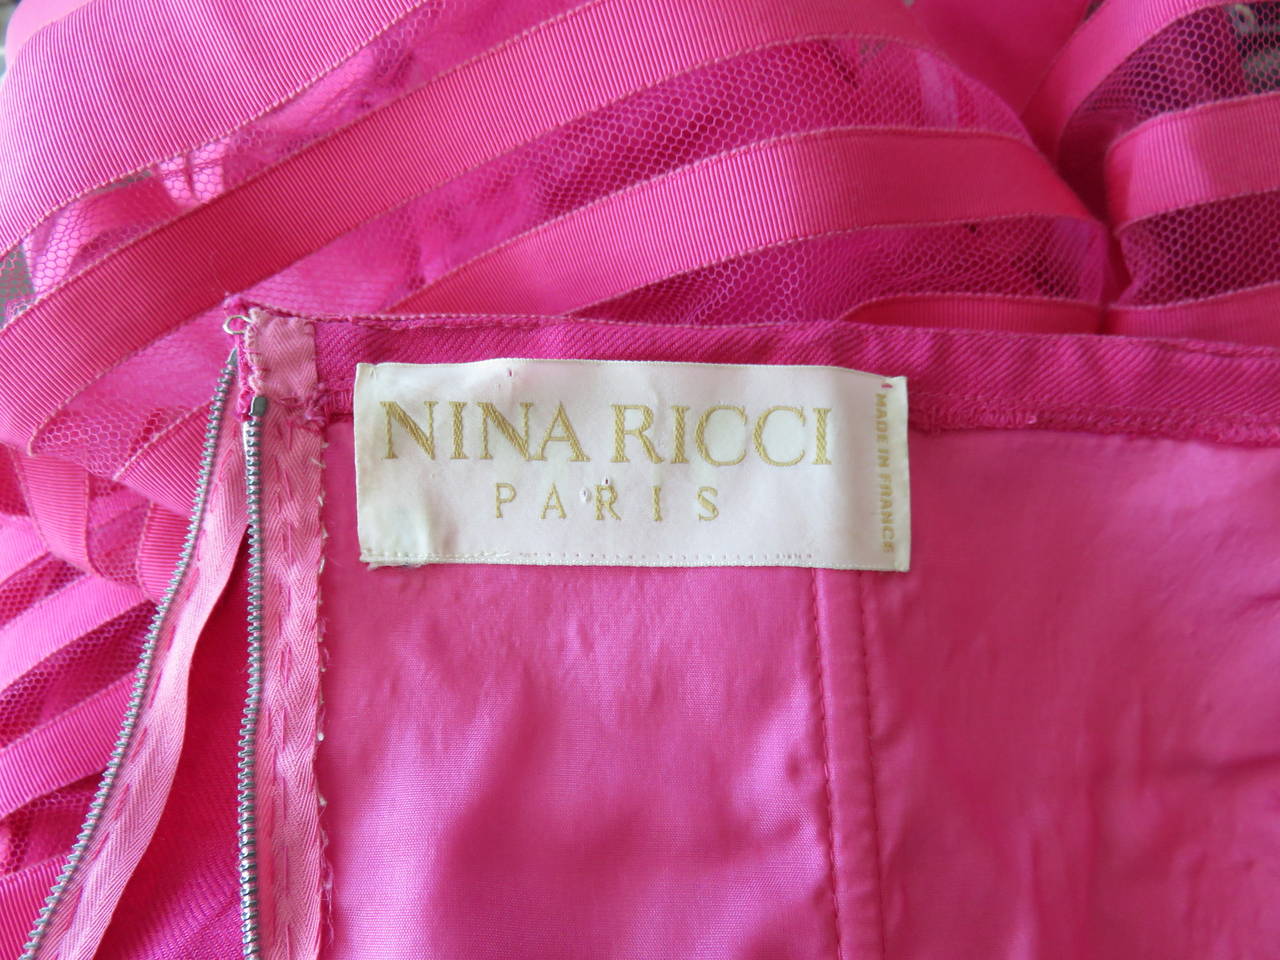 1970's NINA RICCI PARIS Hot pink tiered party dress For Sale 2